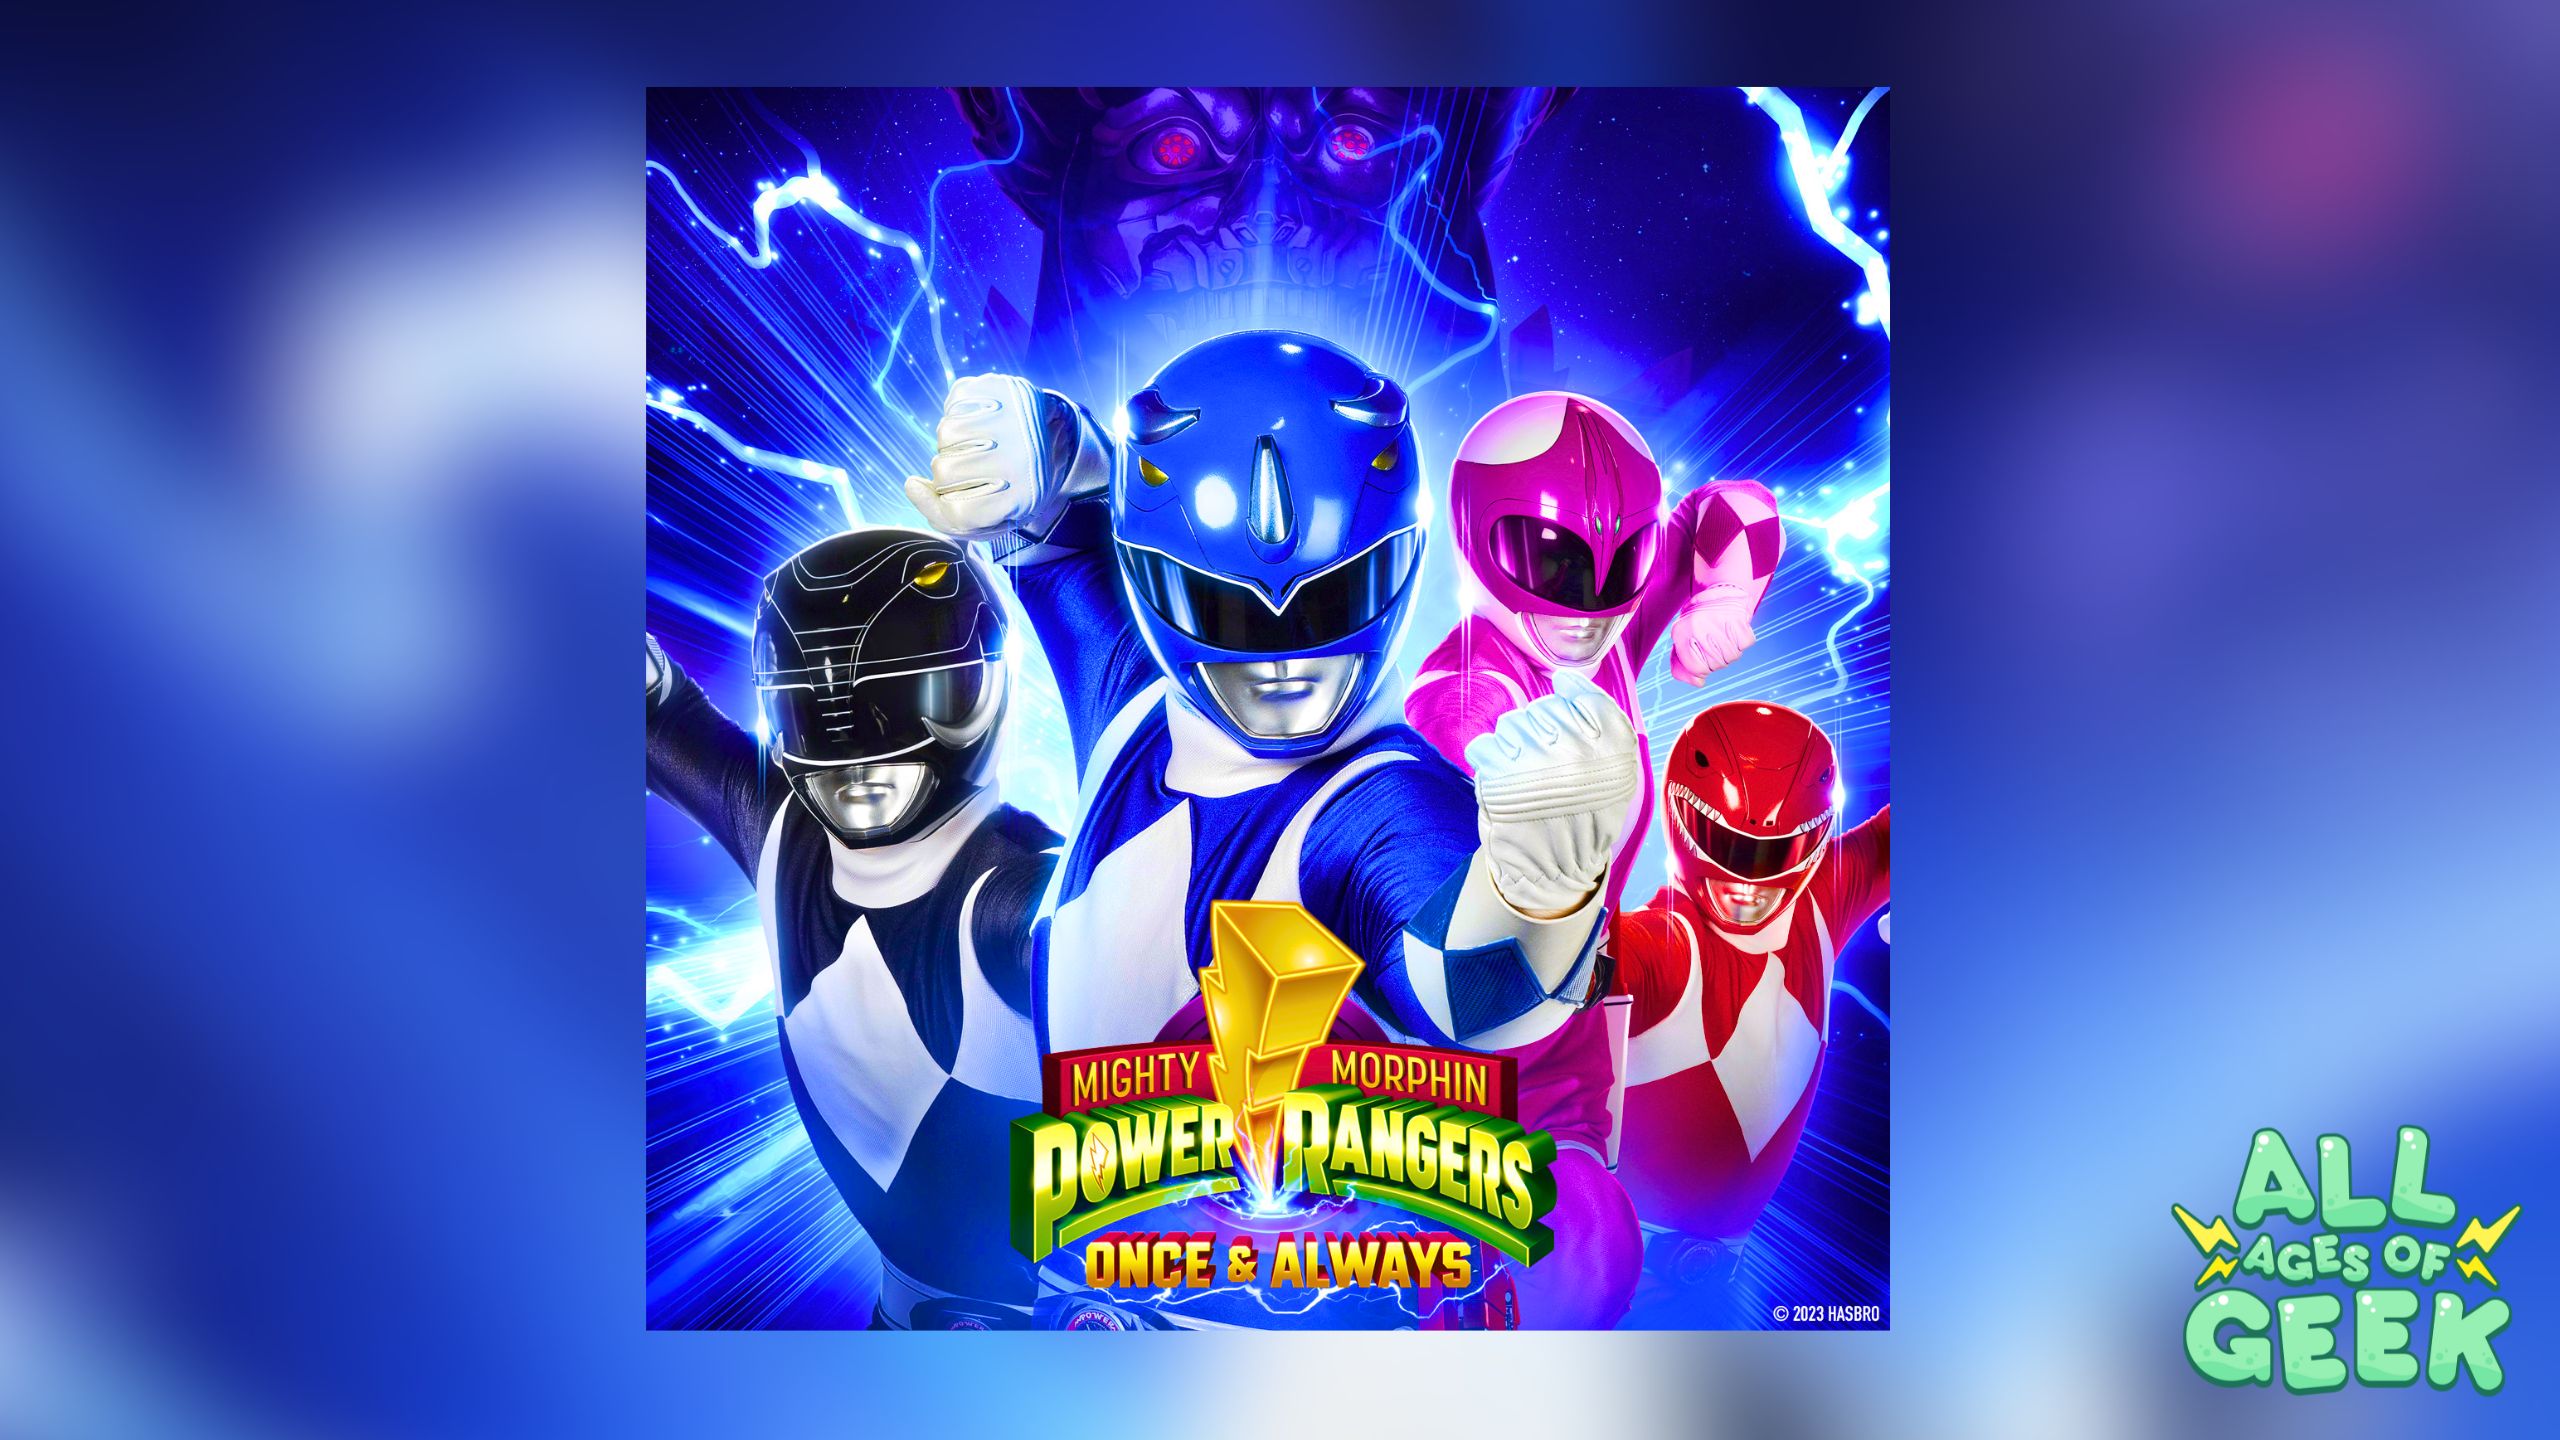 Mighty Morphin Power Rangers: Once & Always Review